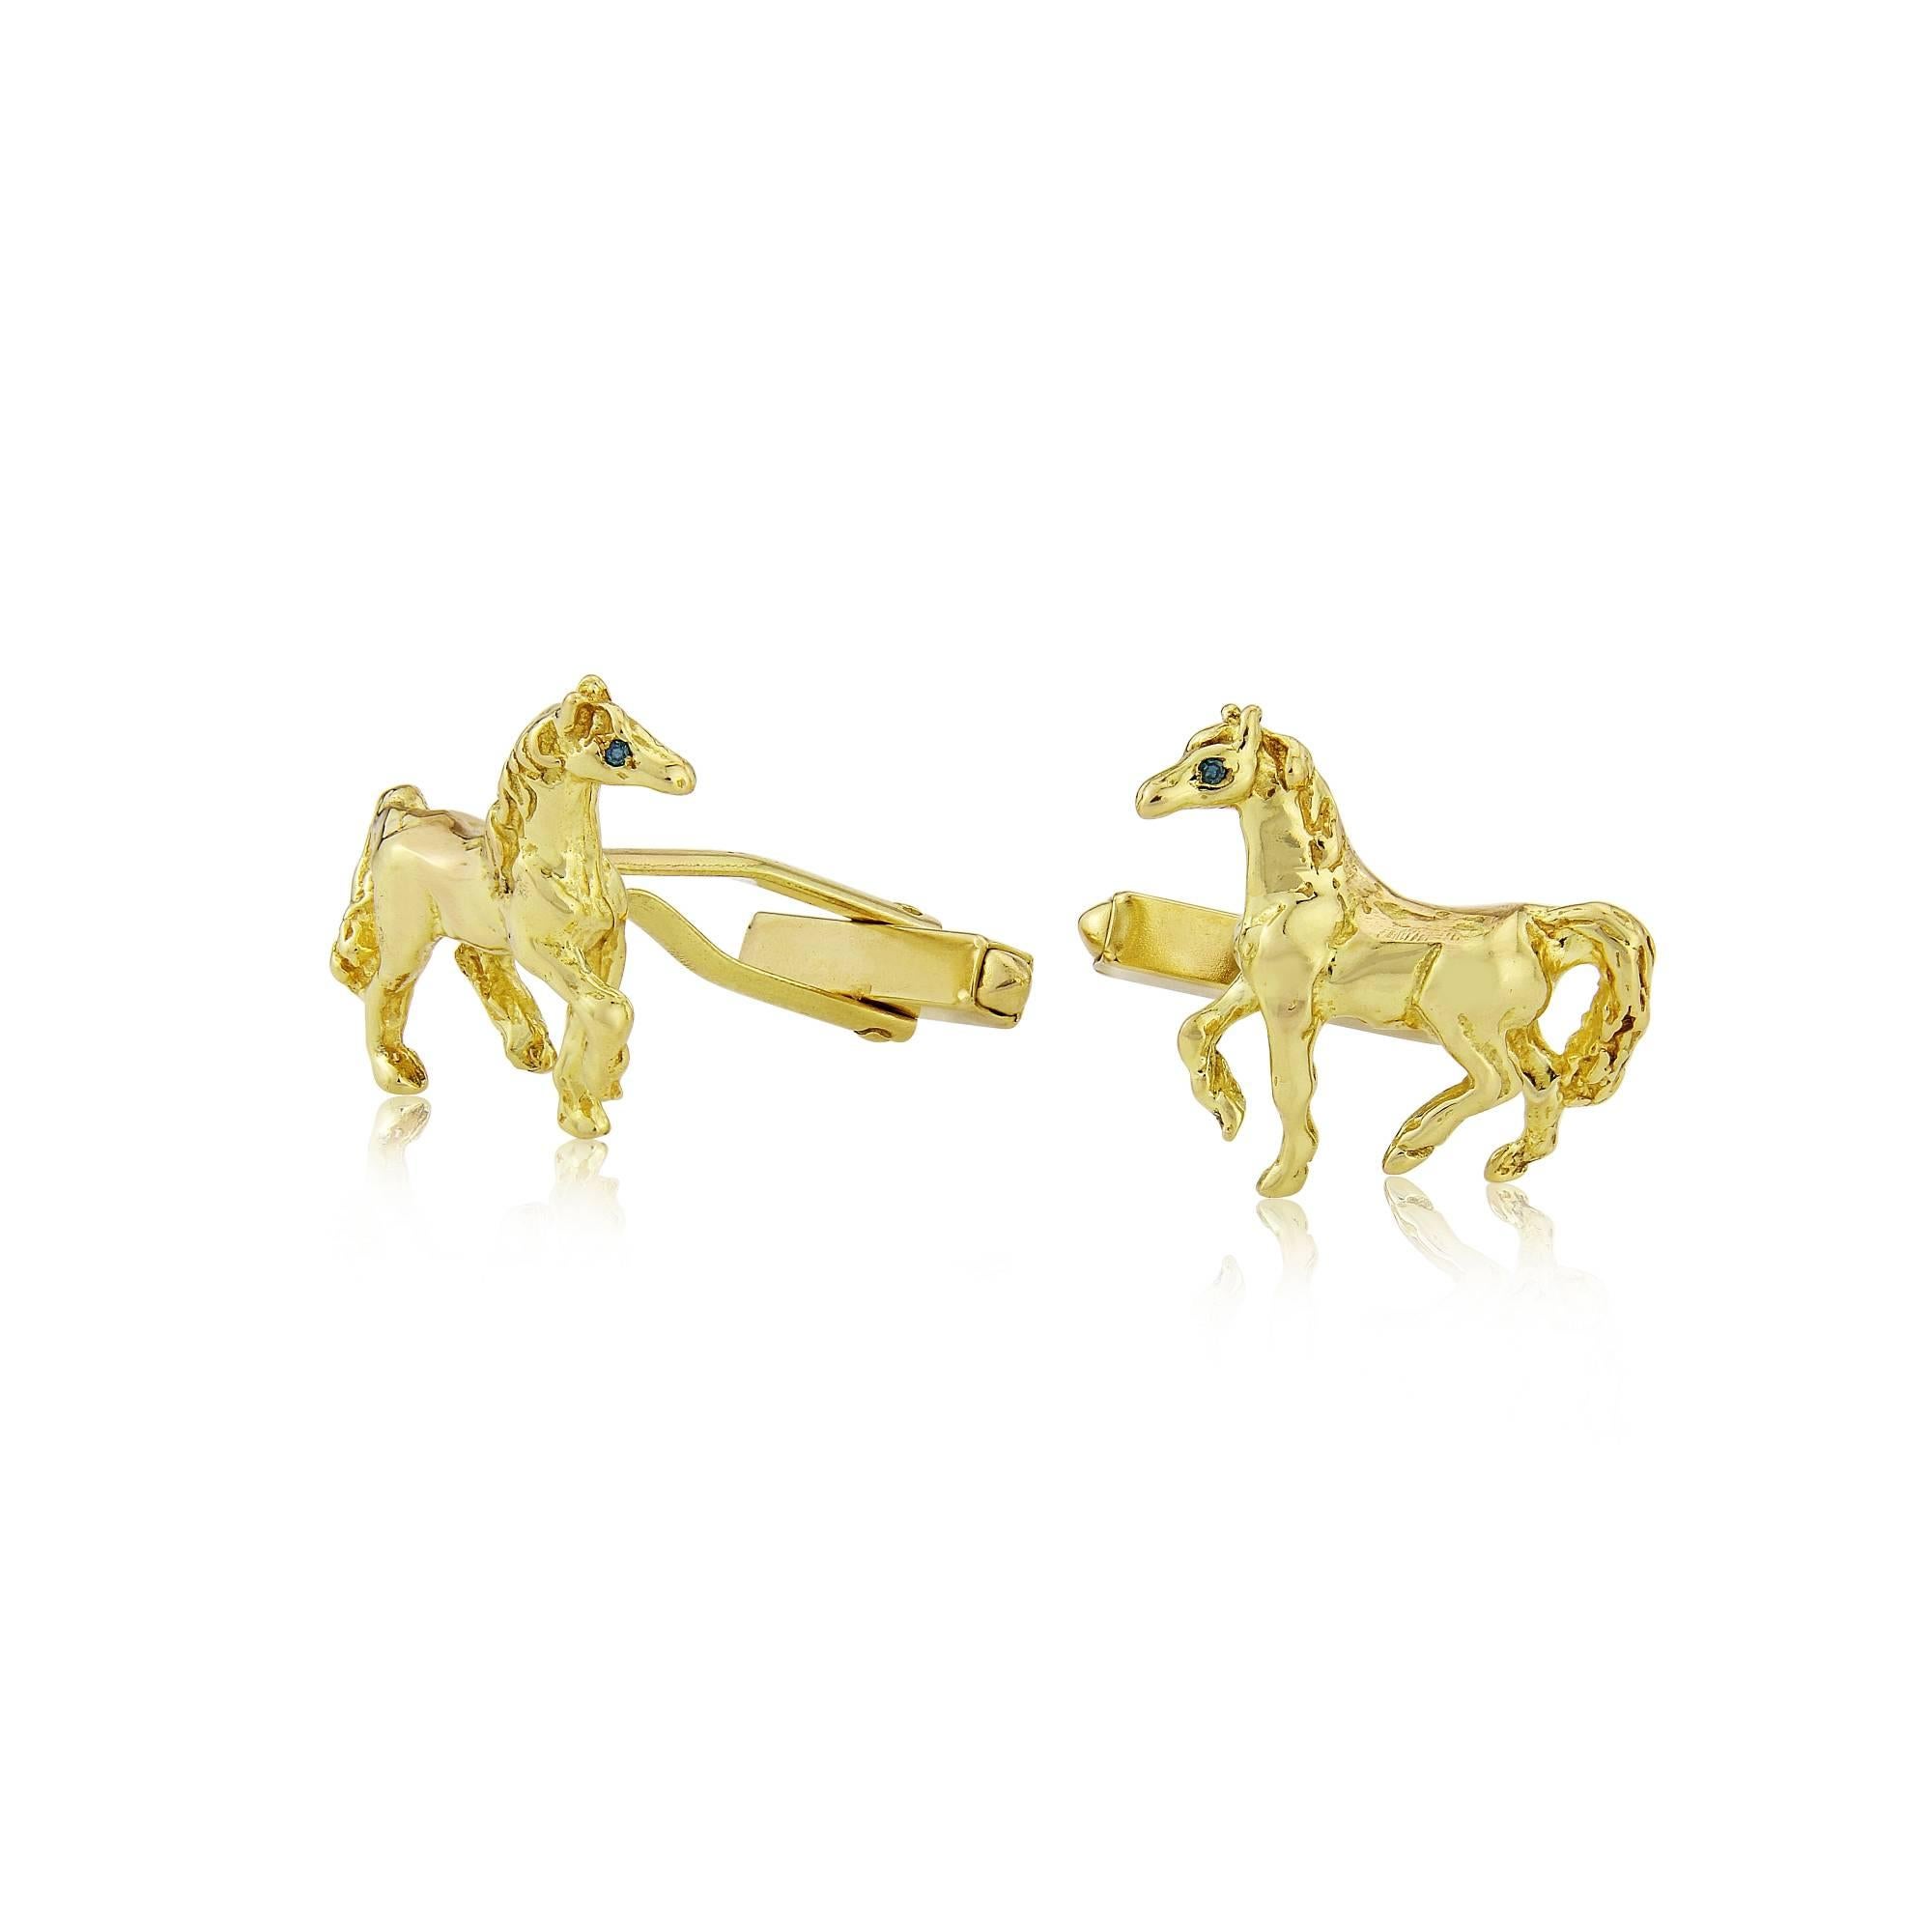 This miniature sculpture catches the elegant movement of a beautiful horse.
Cast in solid 18 k gold the luxurious look as enhanced by the emeralds set as the eyes.
The cufflinks are made as a right and left and sit beautifully on the cuff.
Each